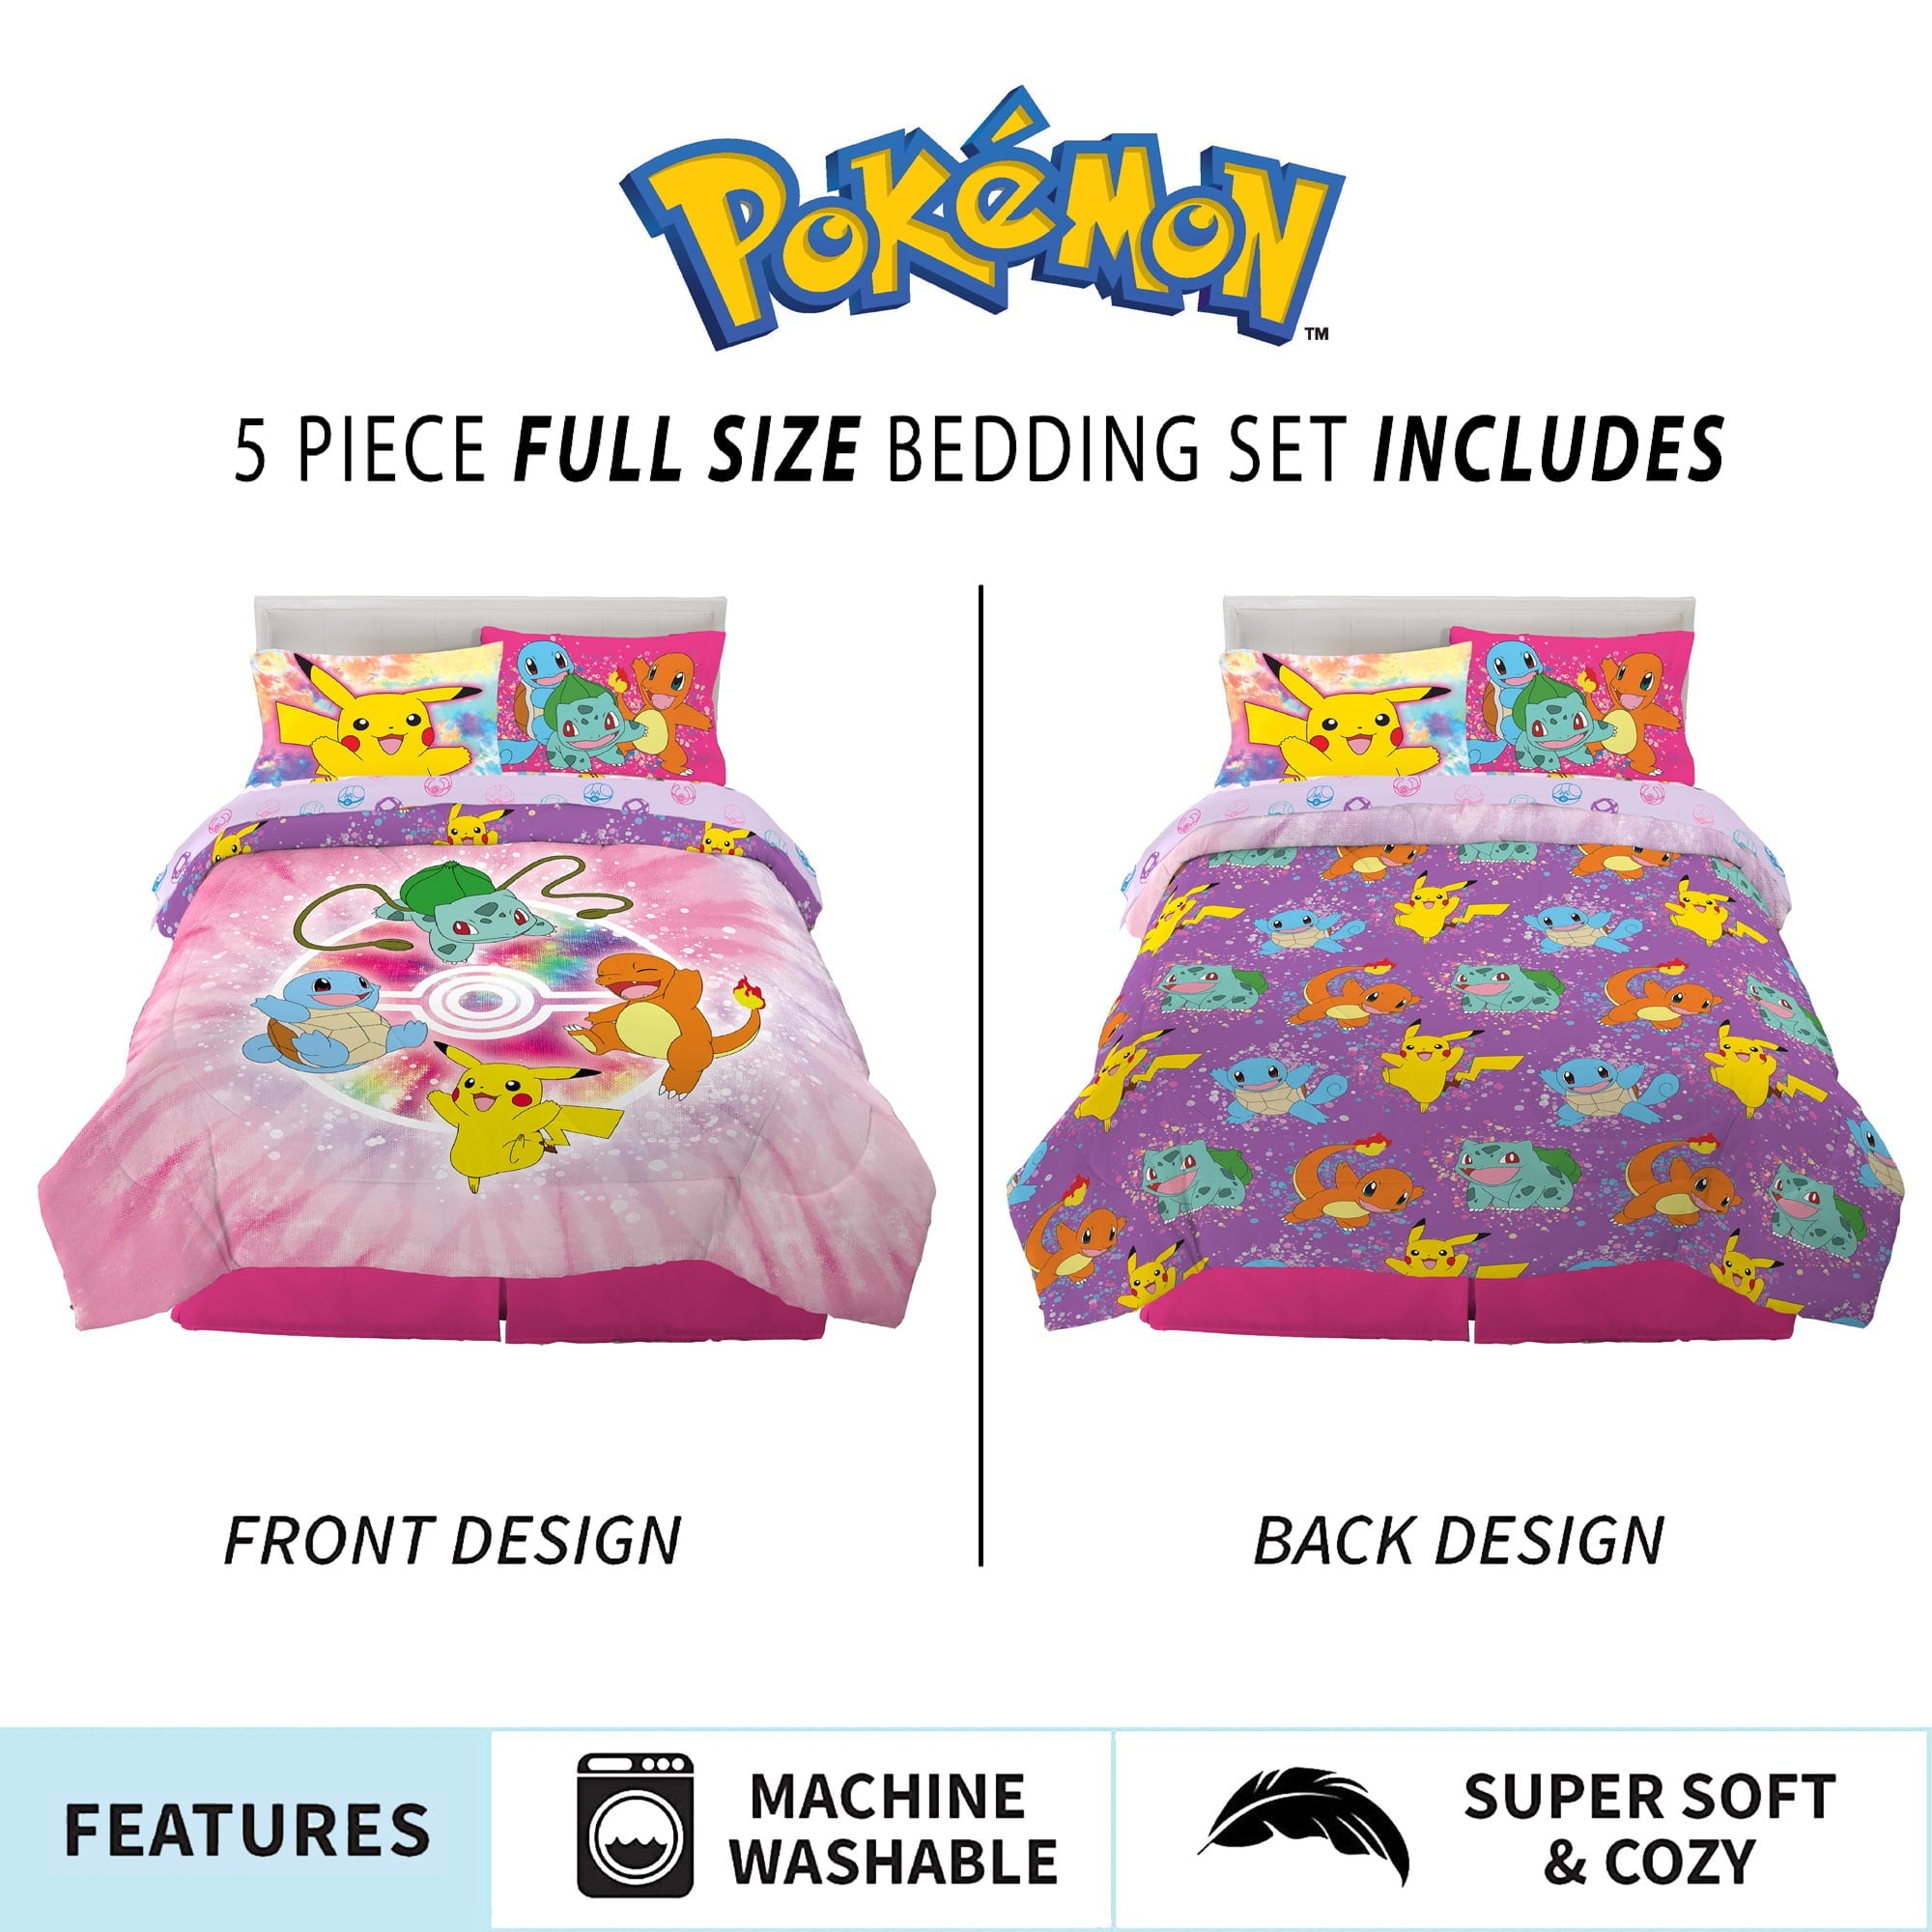 Pokémon Kids Full Bed in a Bag, Tie-Dye, Gaming Bedding, Comforter and Sheets, Purple